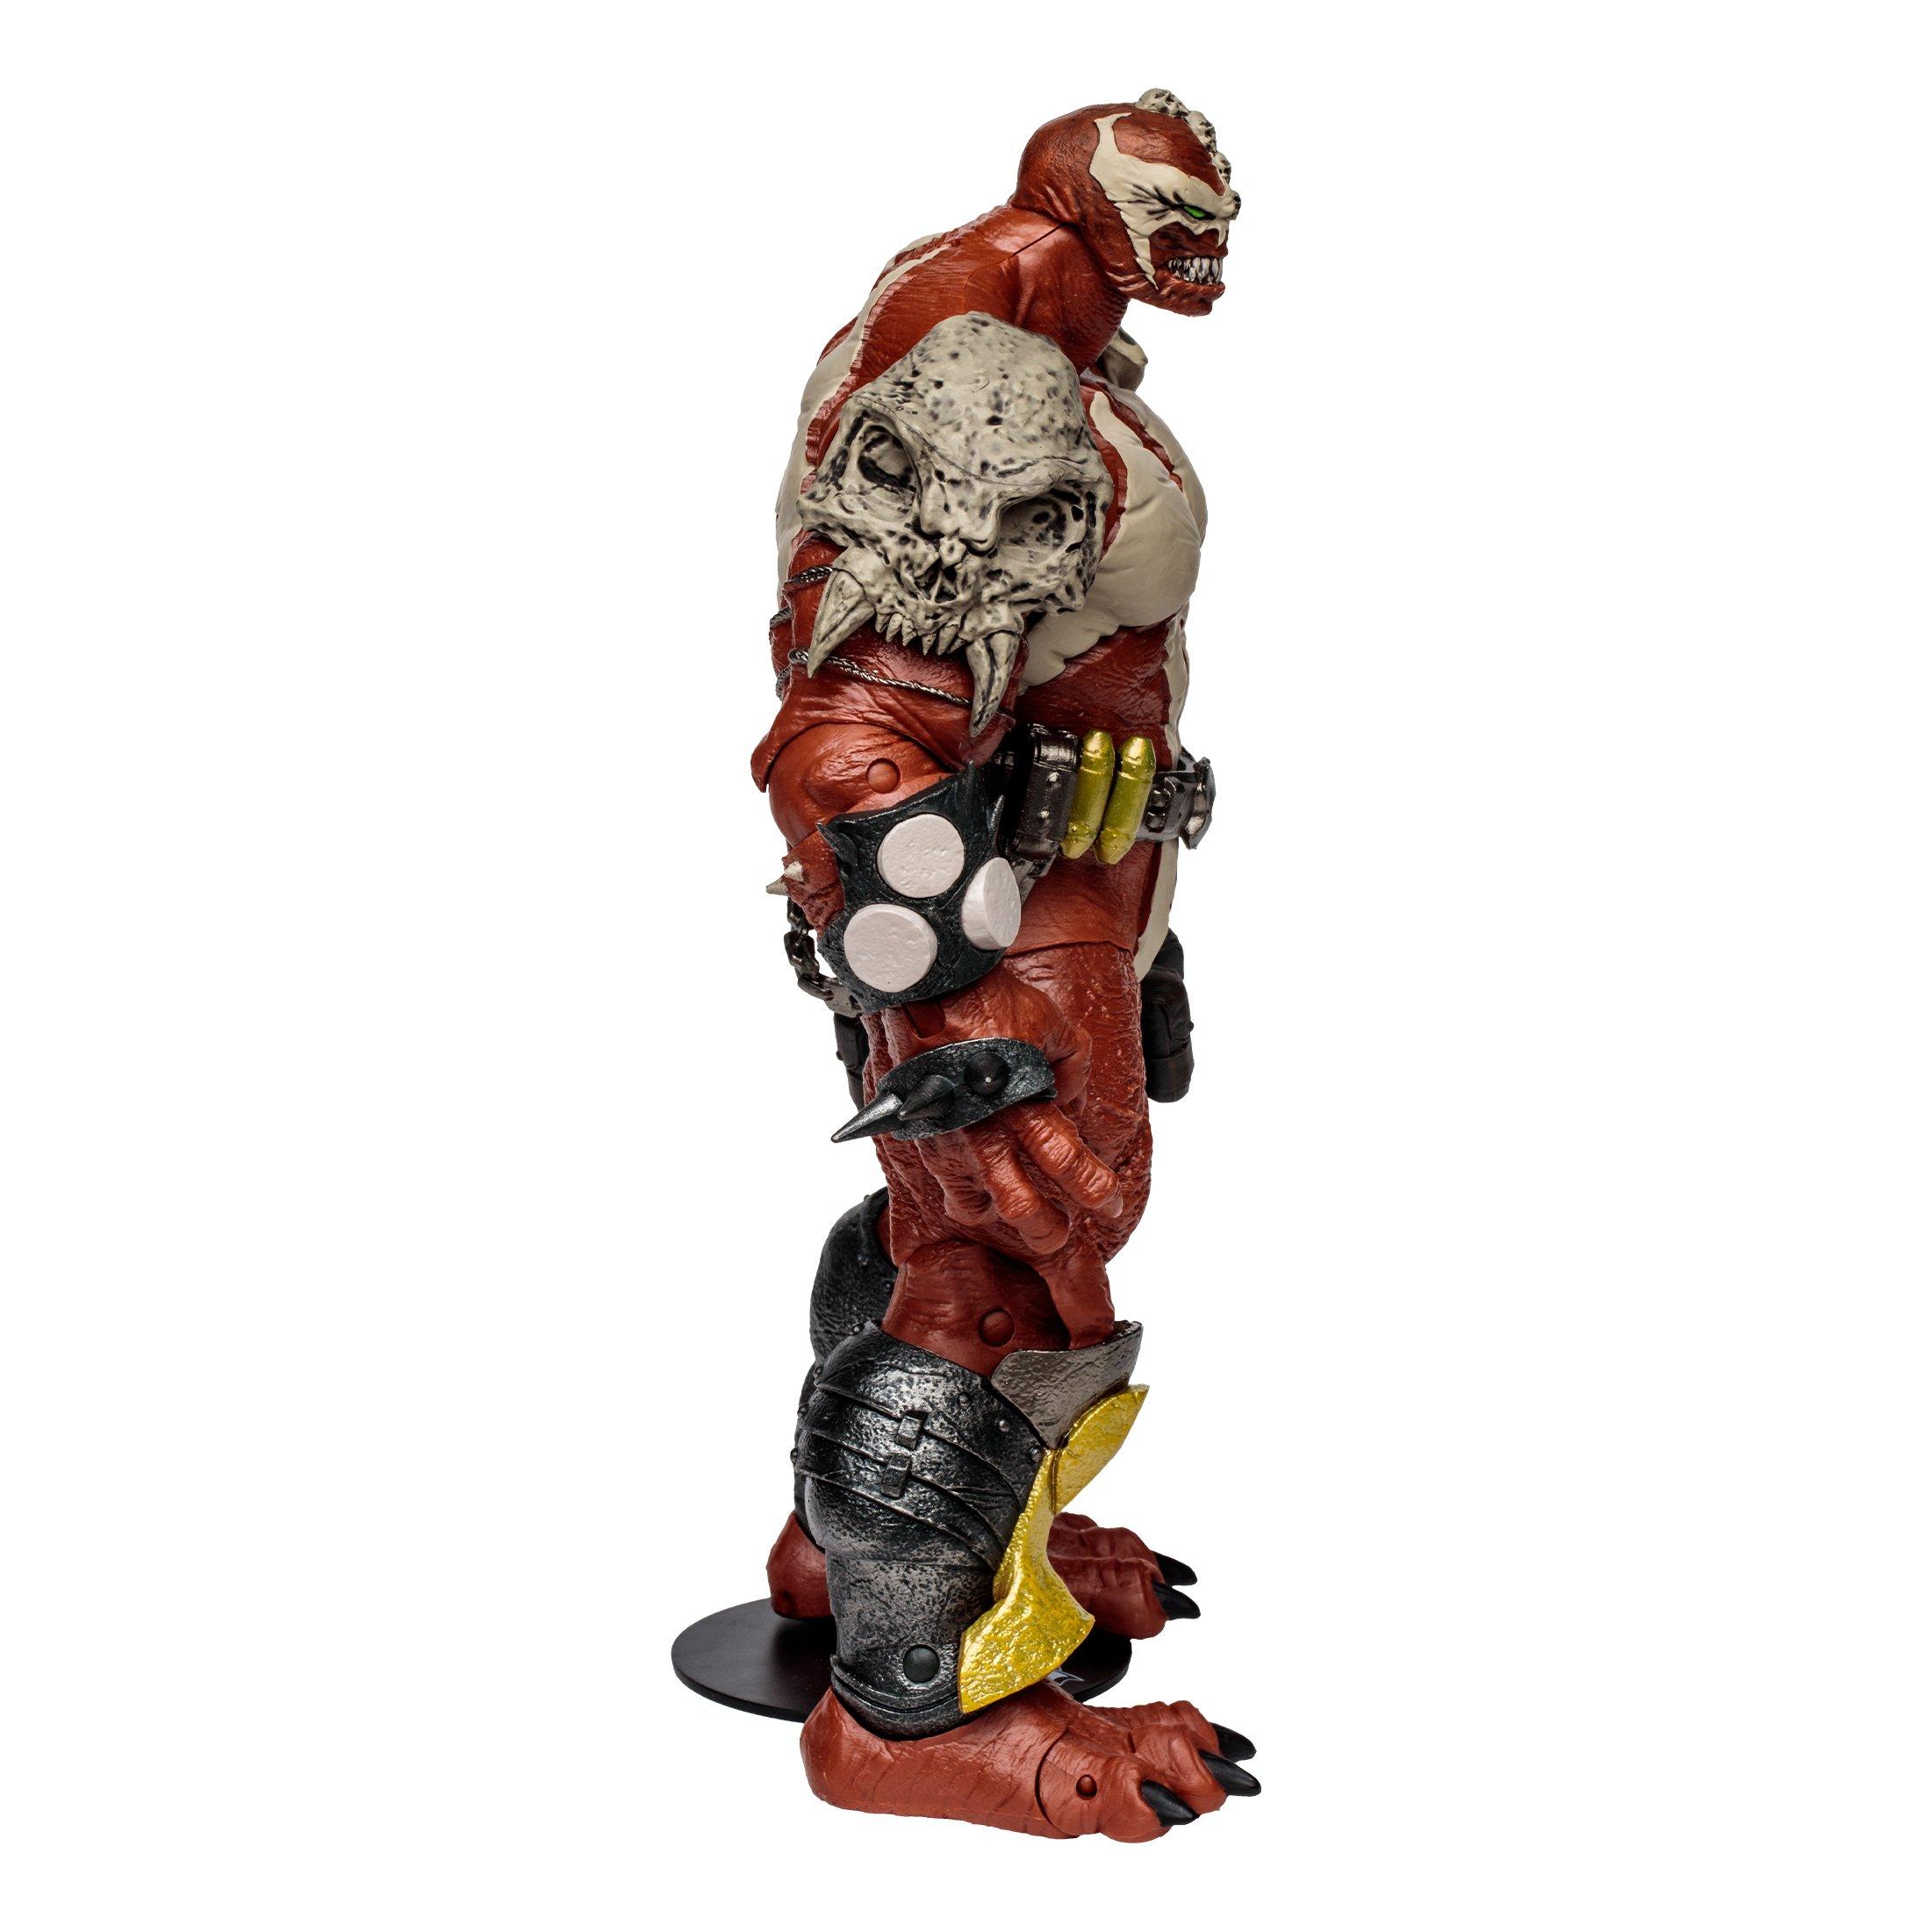 Gears Of War Action Figures Announced By McFarlane Toys